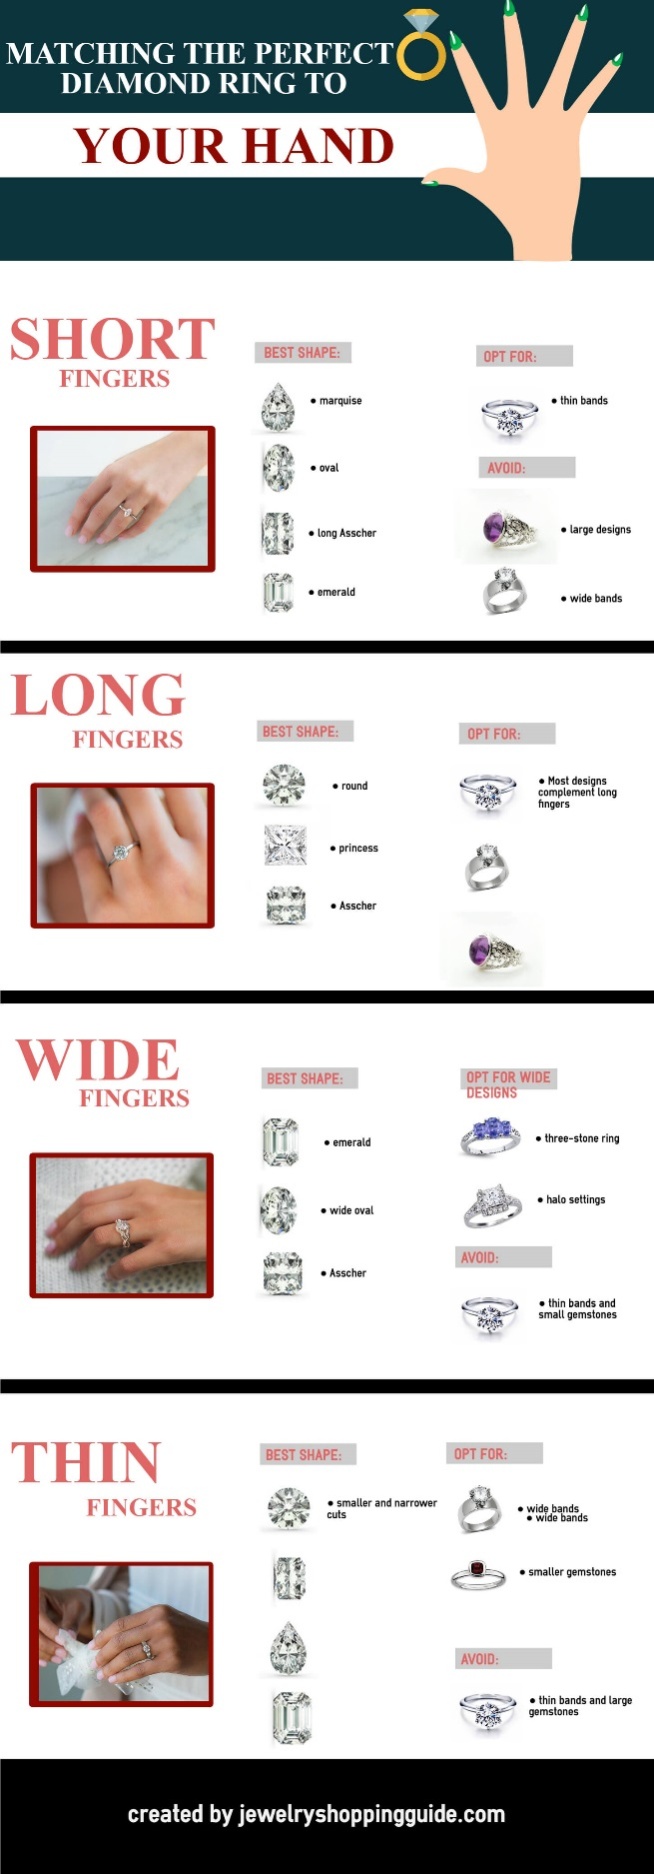 C:\Users\Hamid\Dropbox\Jewelry Shopping Guide\Other Docs\Infographics\new\How-to-choose-enagagement-ring-for-your-hand-infographic.jpg